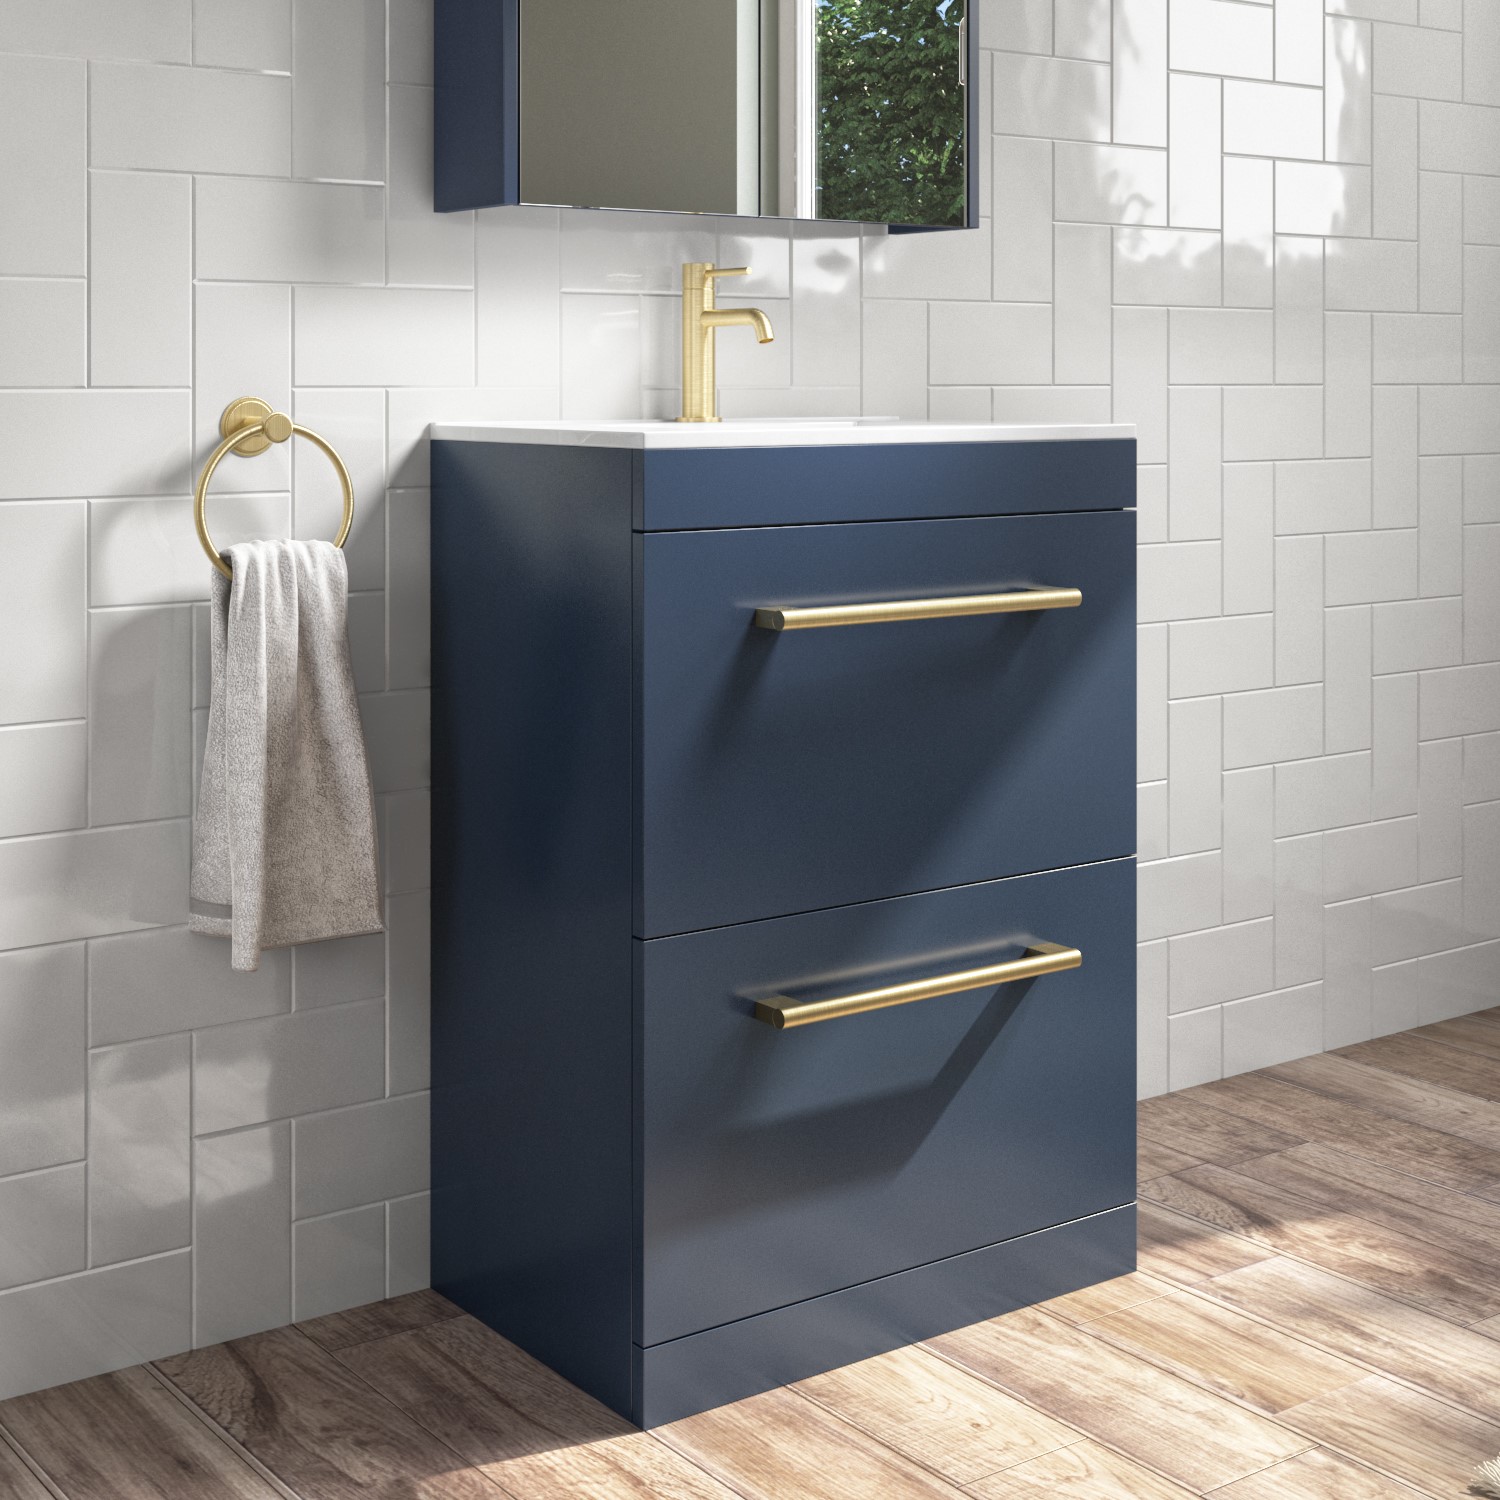 1100mm Blue Toilet and Sink Unit with Round Toilet Drawers and Brass Fittings - Ashford